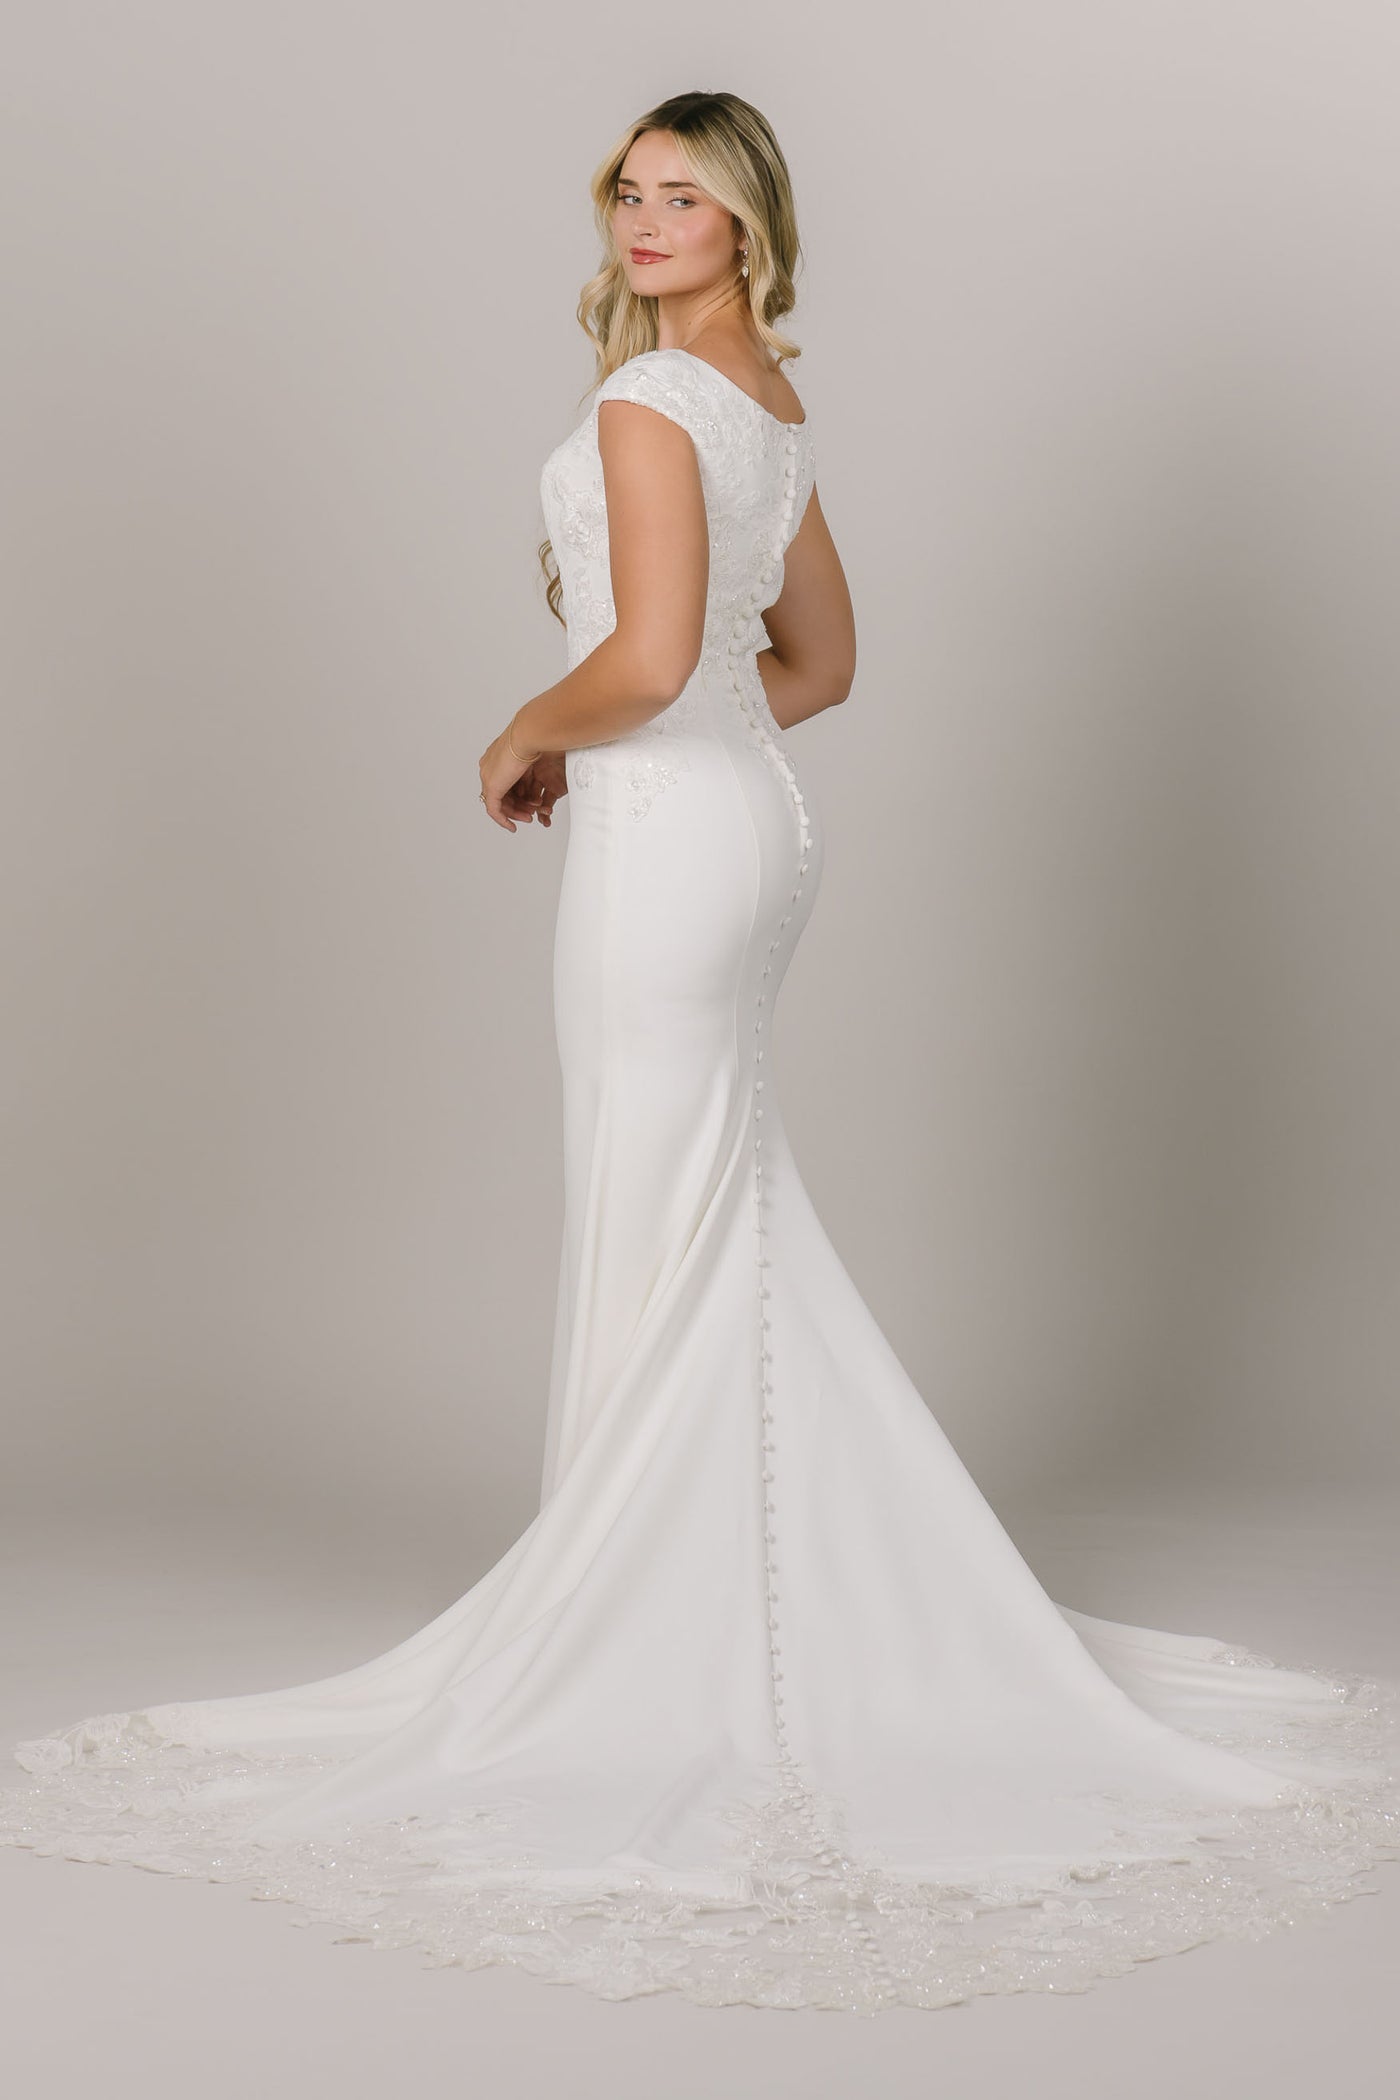 This is a simple fitted modest wedding dress with a lacy intricate train.